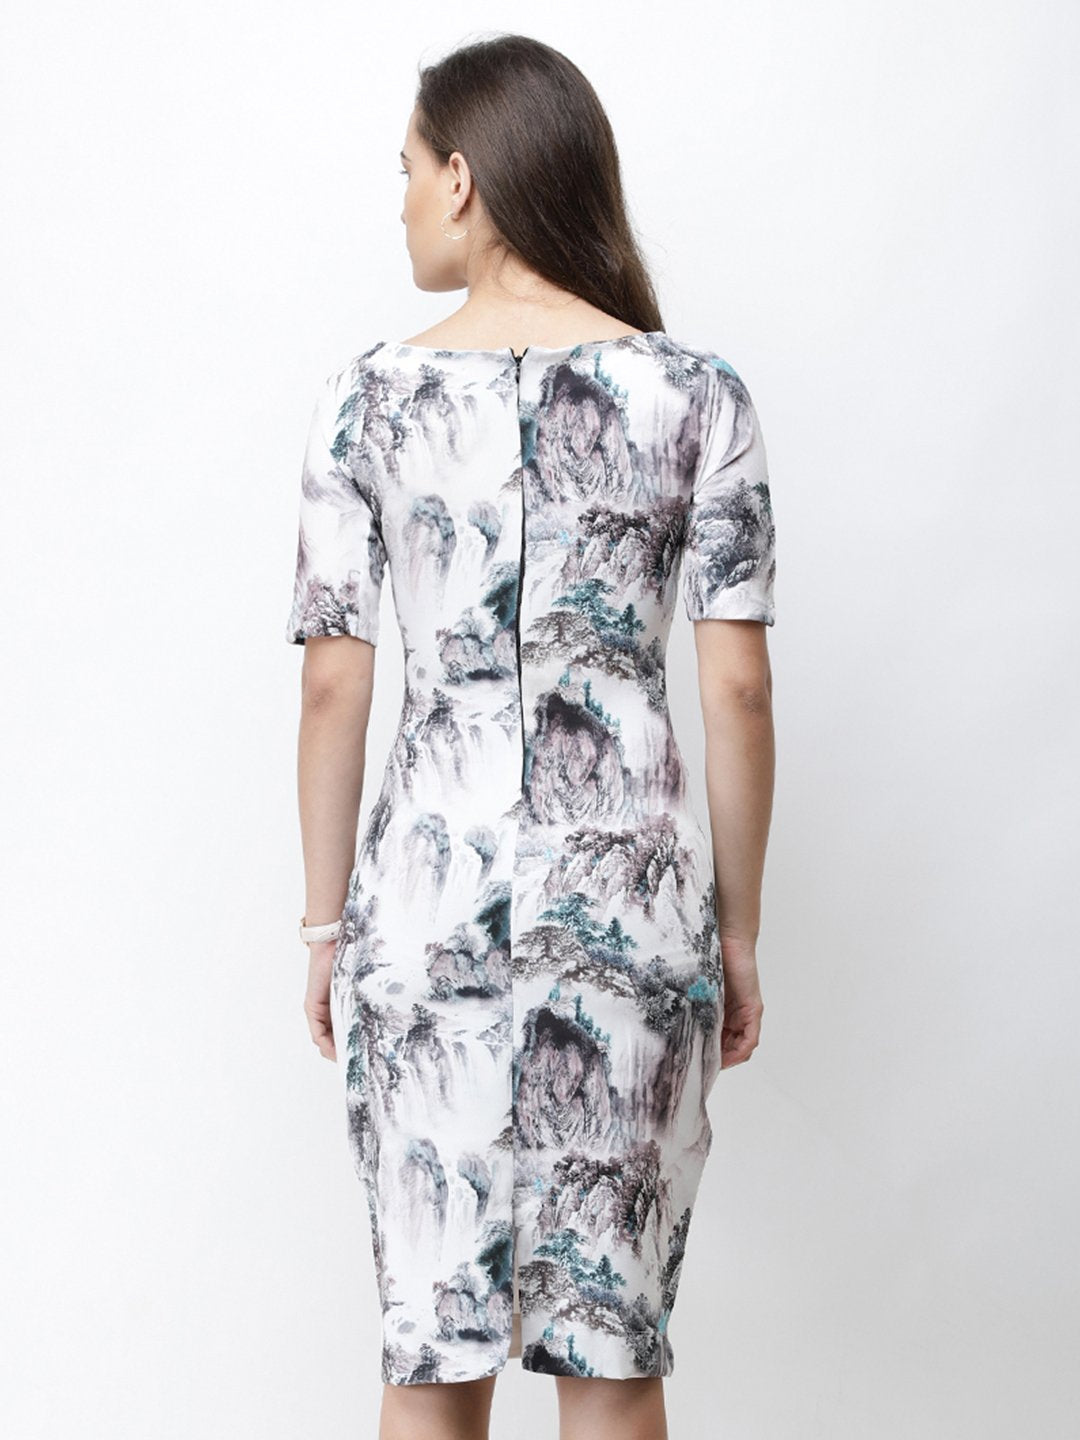 Cation White Printed Dress